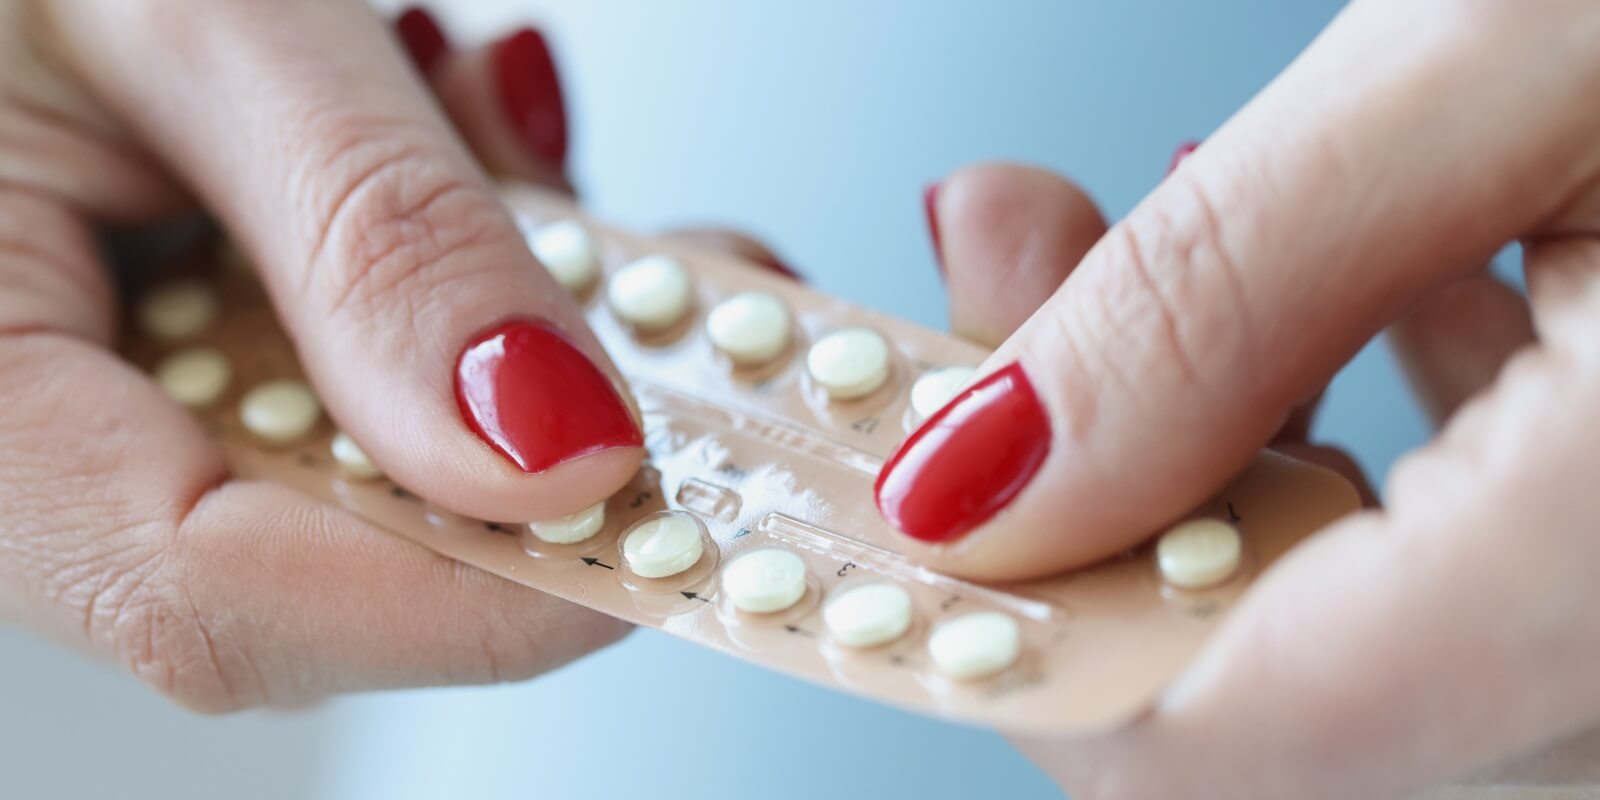 Raleigh, NC woman with red manicure holding blister with contraceptive hormonal pills in her hands closeup